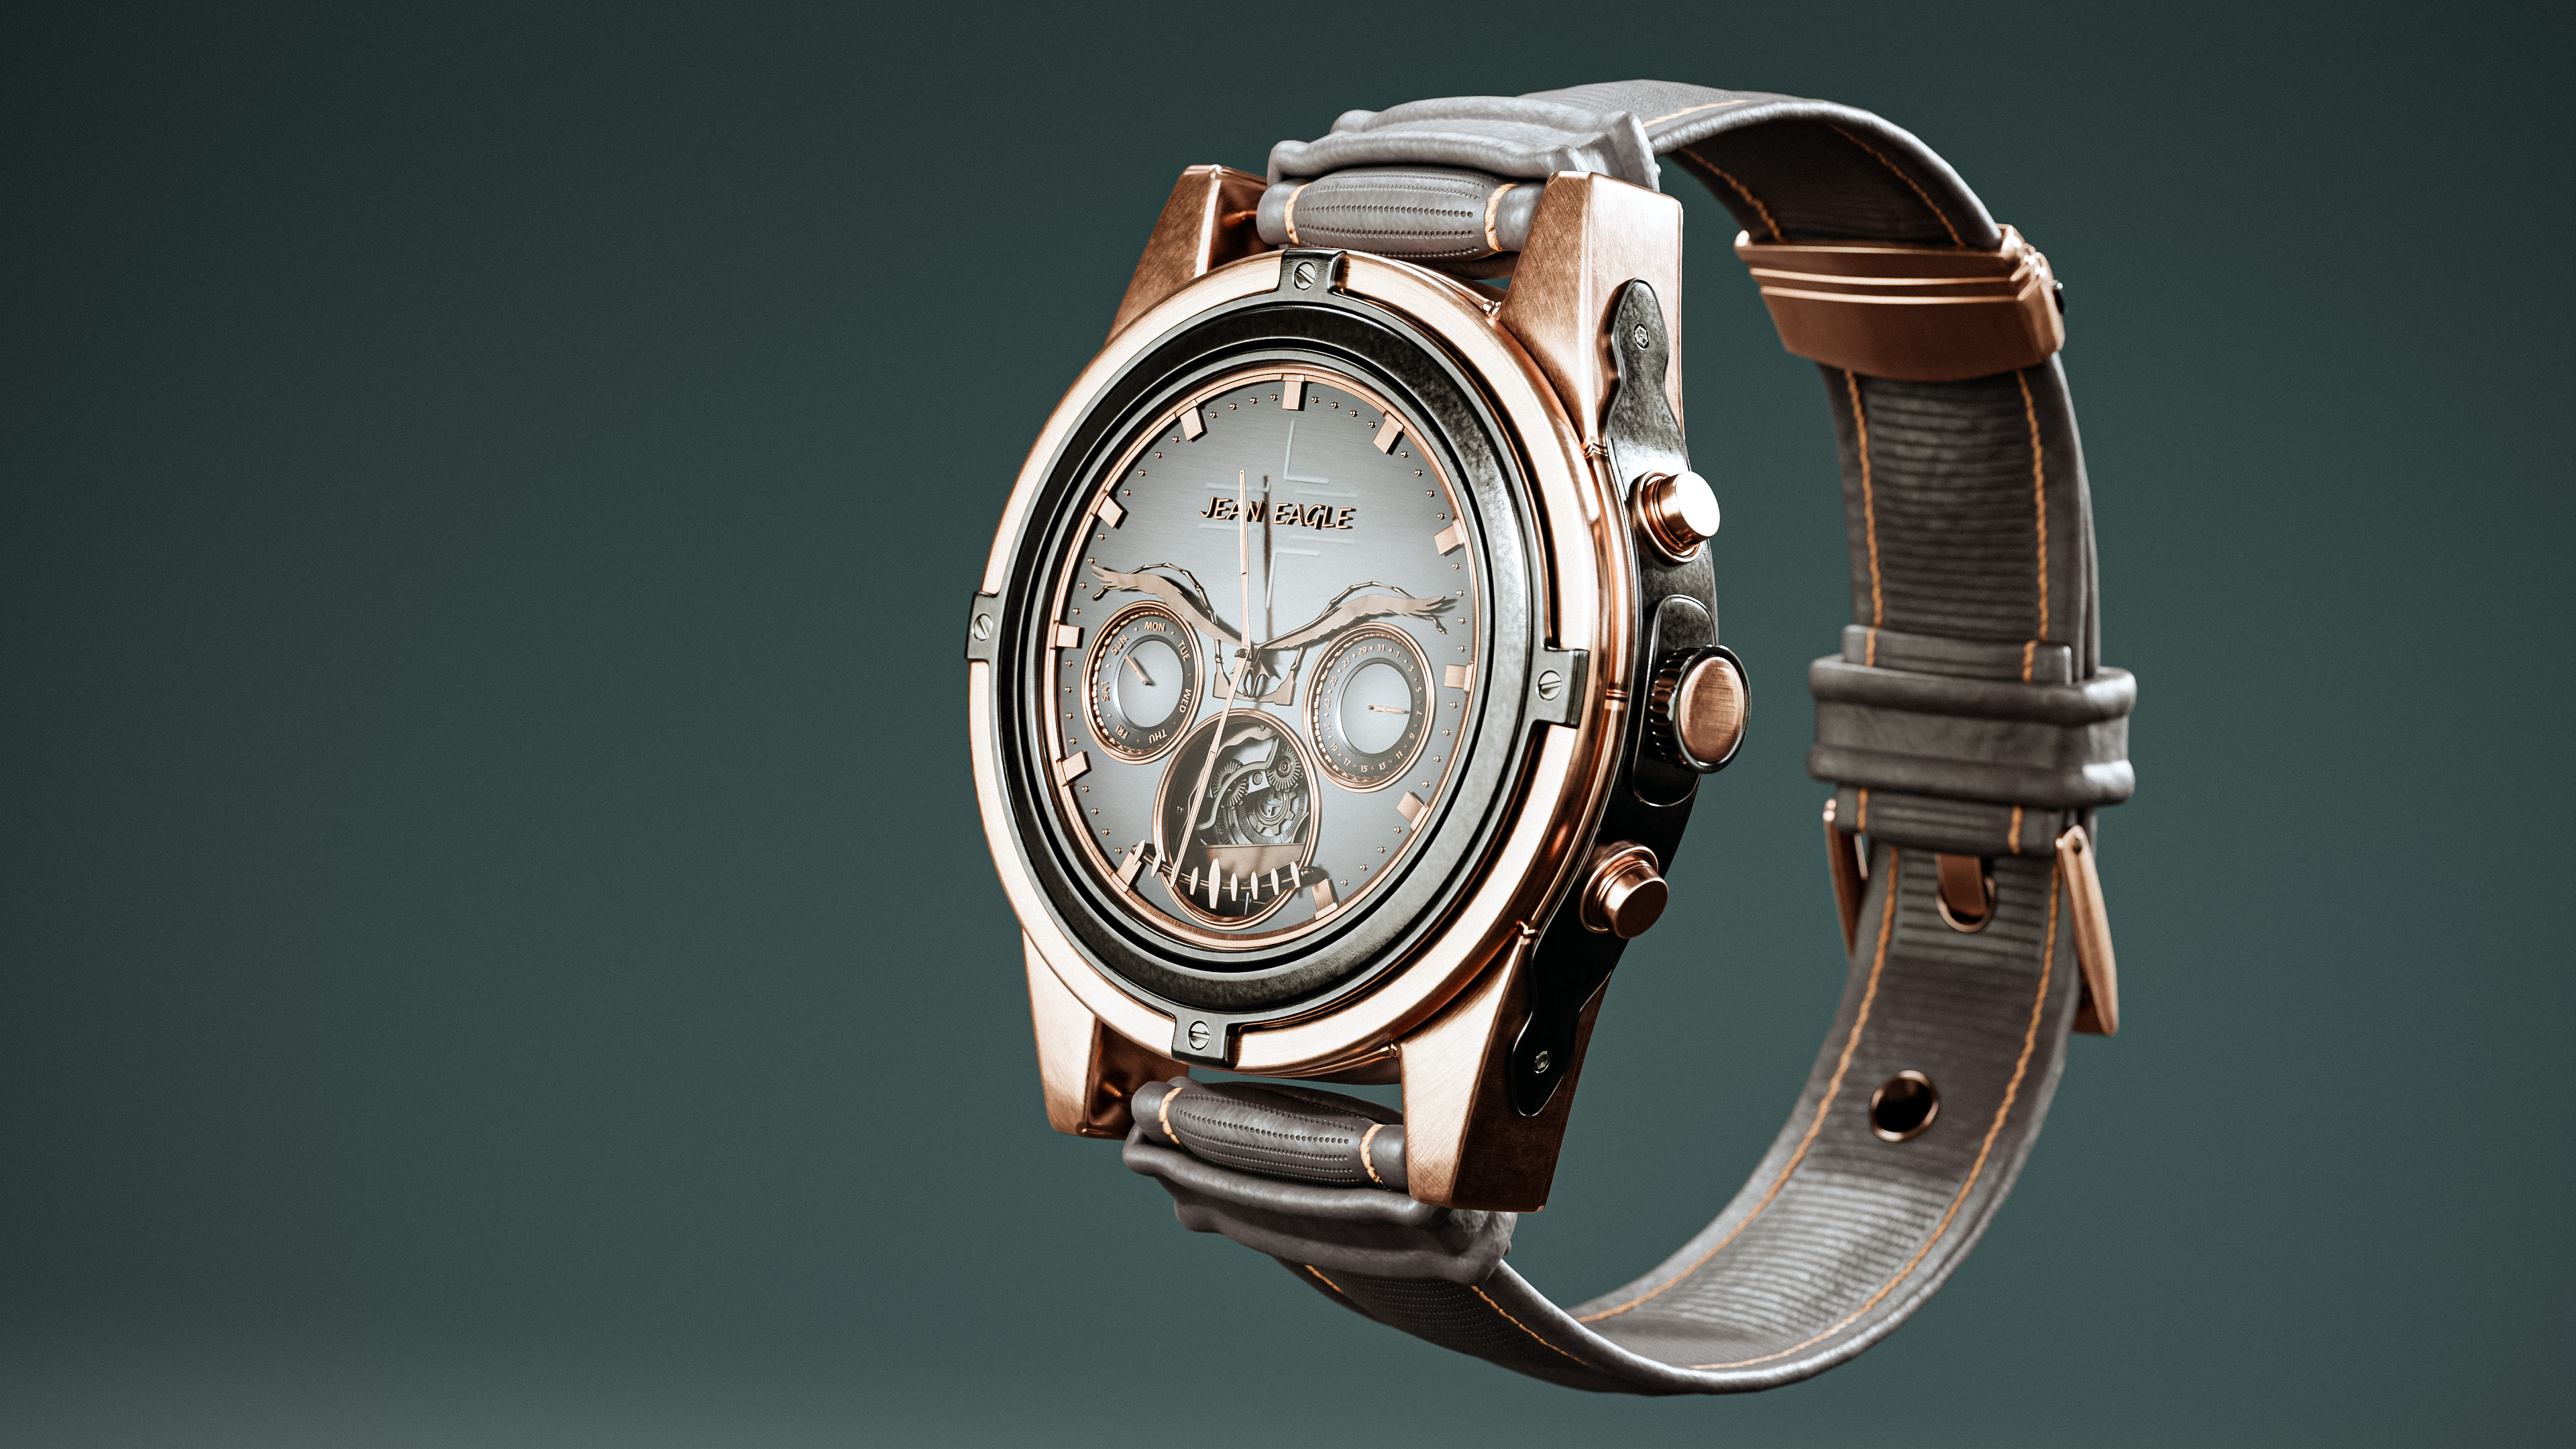 Luxury Watch - Jean Eagle (Fictional) - Finished Projects - Blender ...